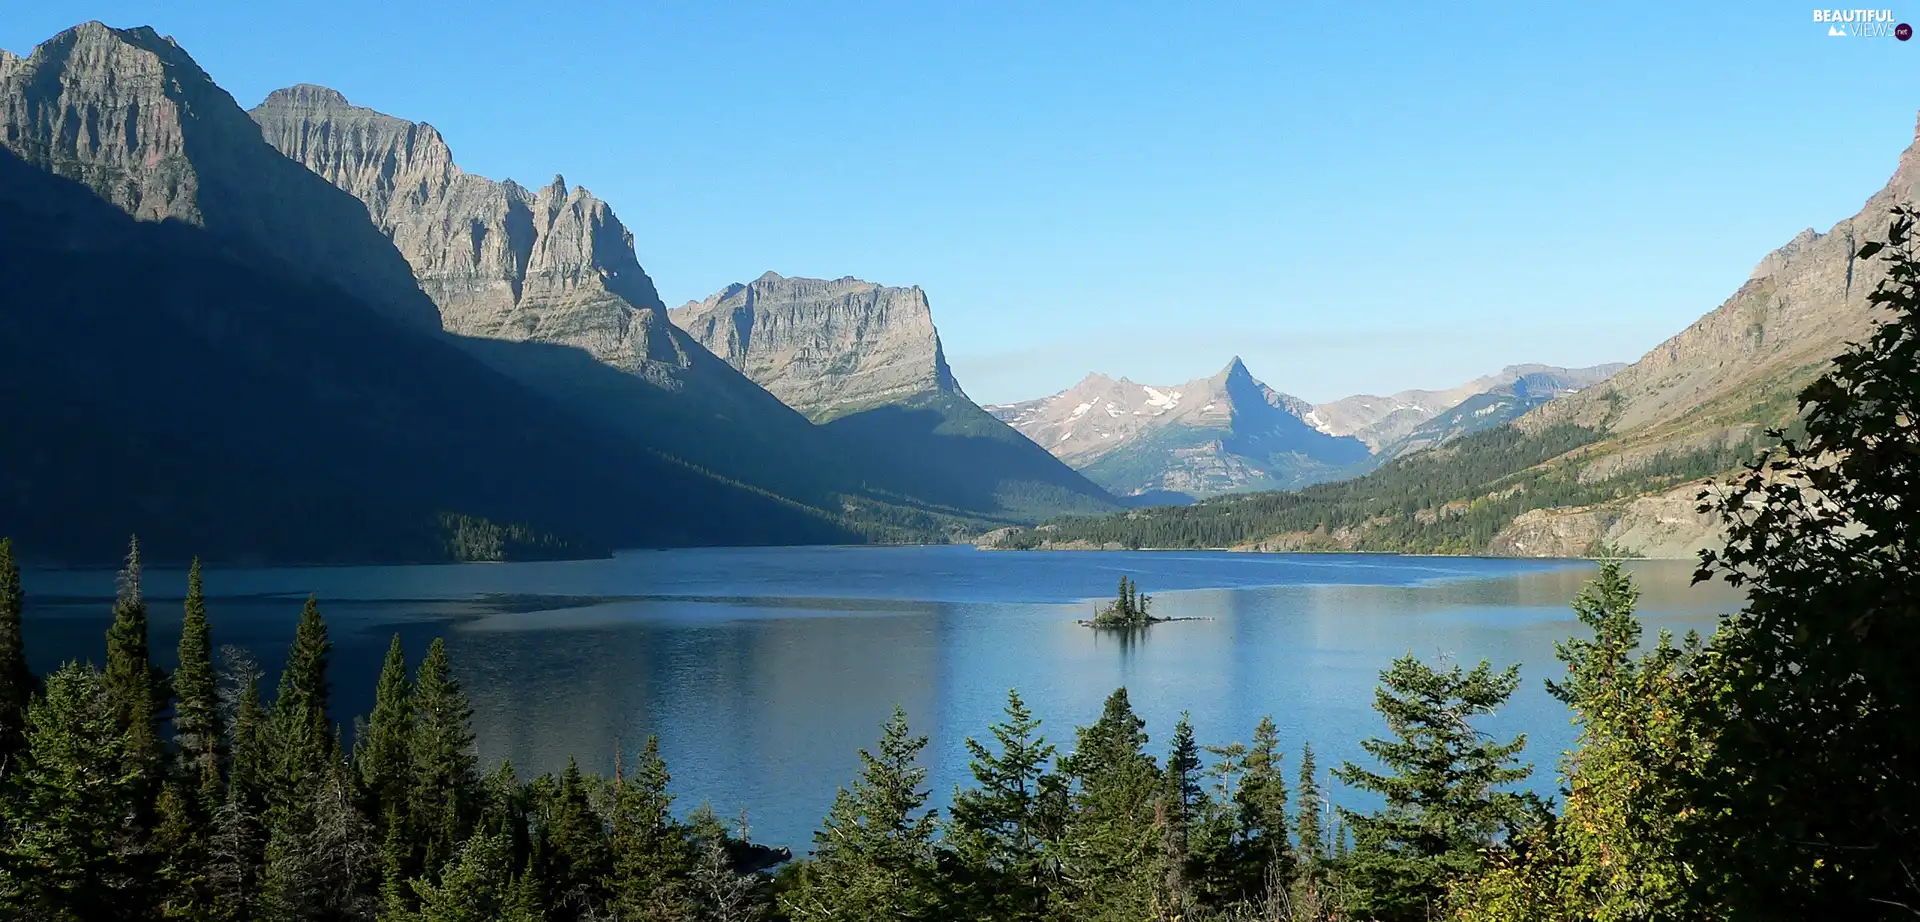 Mountains, Montana State, trees, Glacier National Park, The United States, Saint Mary Lake, viewes